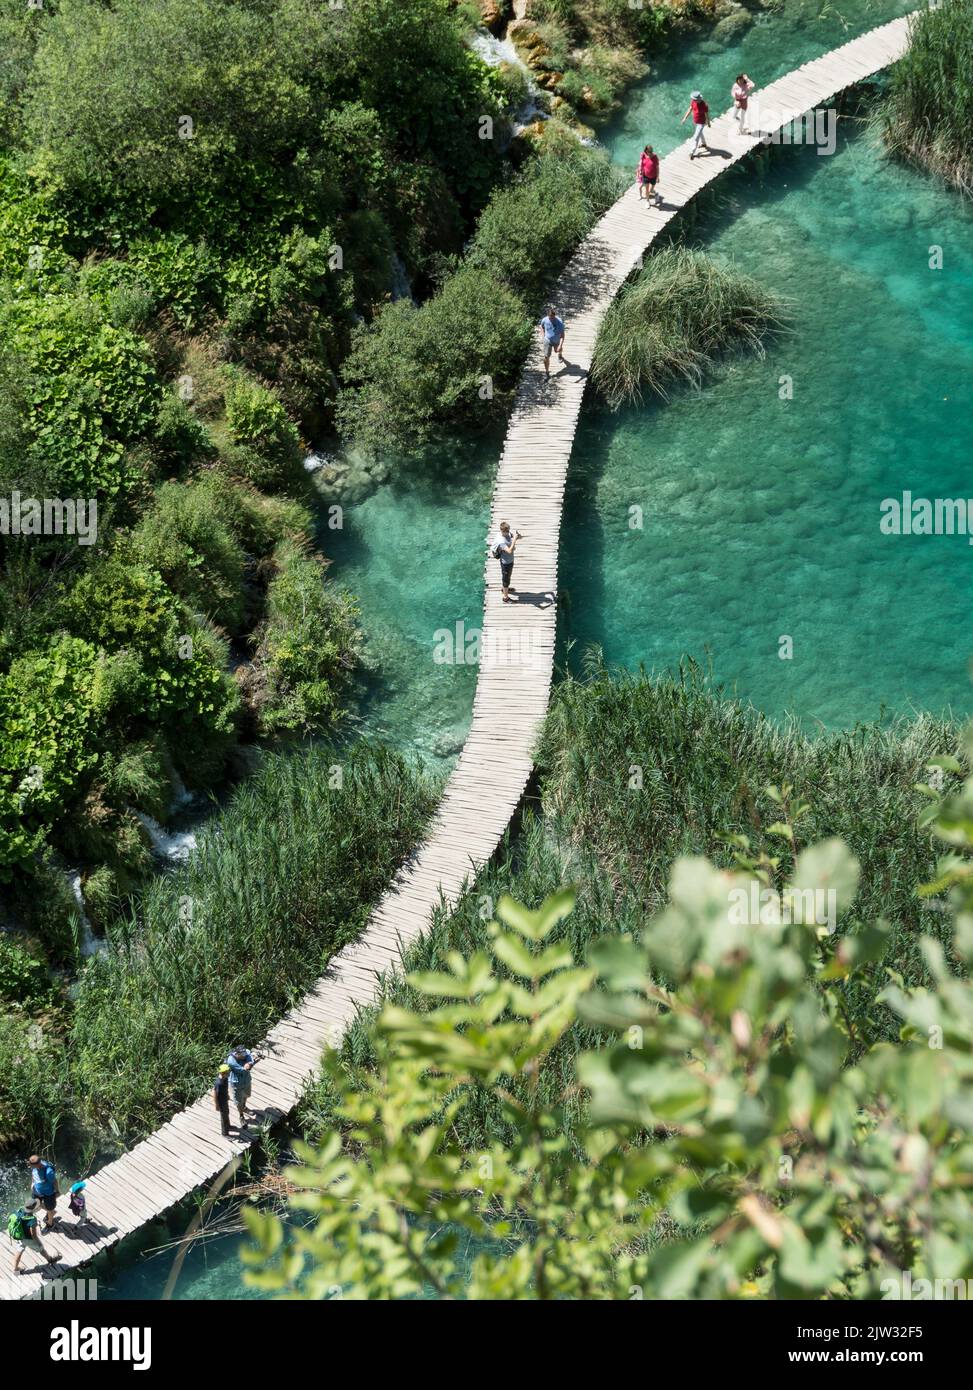 Aerial view of tourists walking on a board walk over one of the many pools and lakes of Plitvice Lakes National Park, Croatia, Europe. Stock Photo